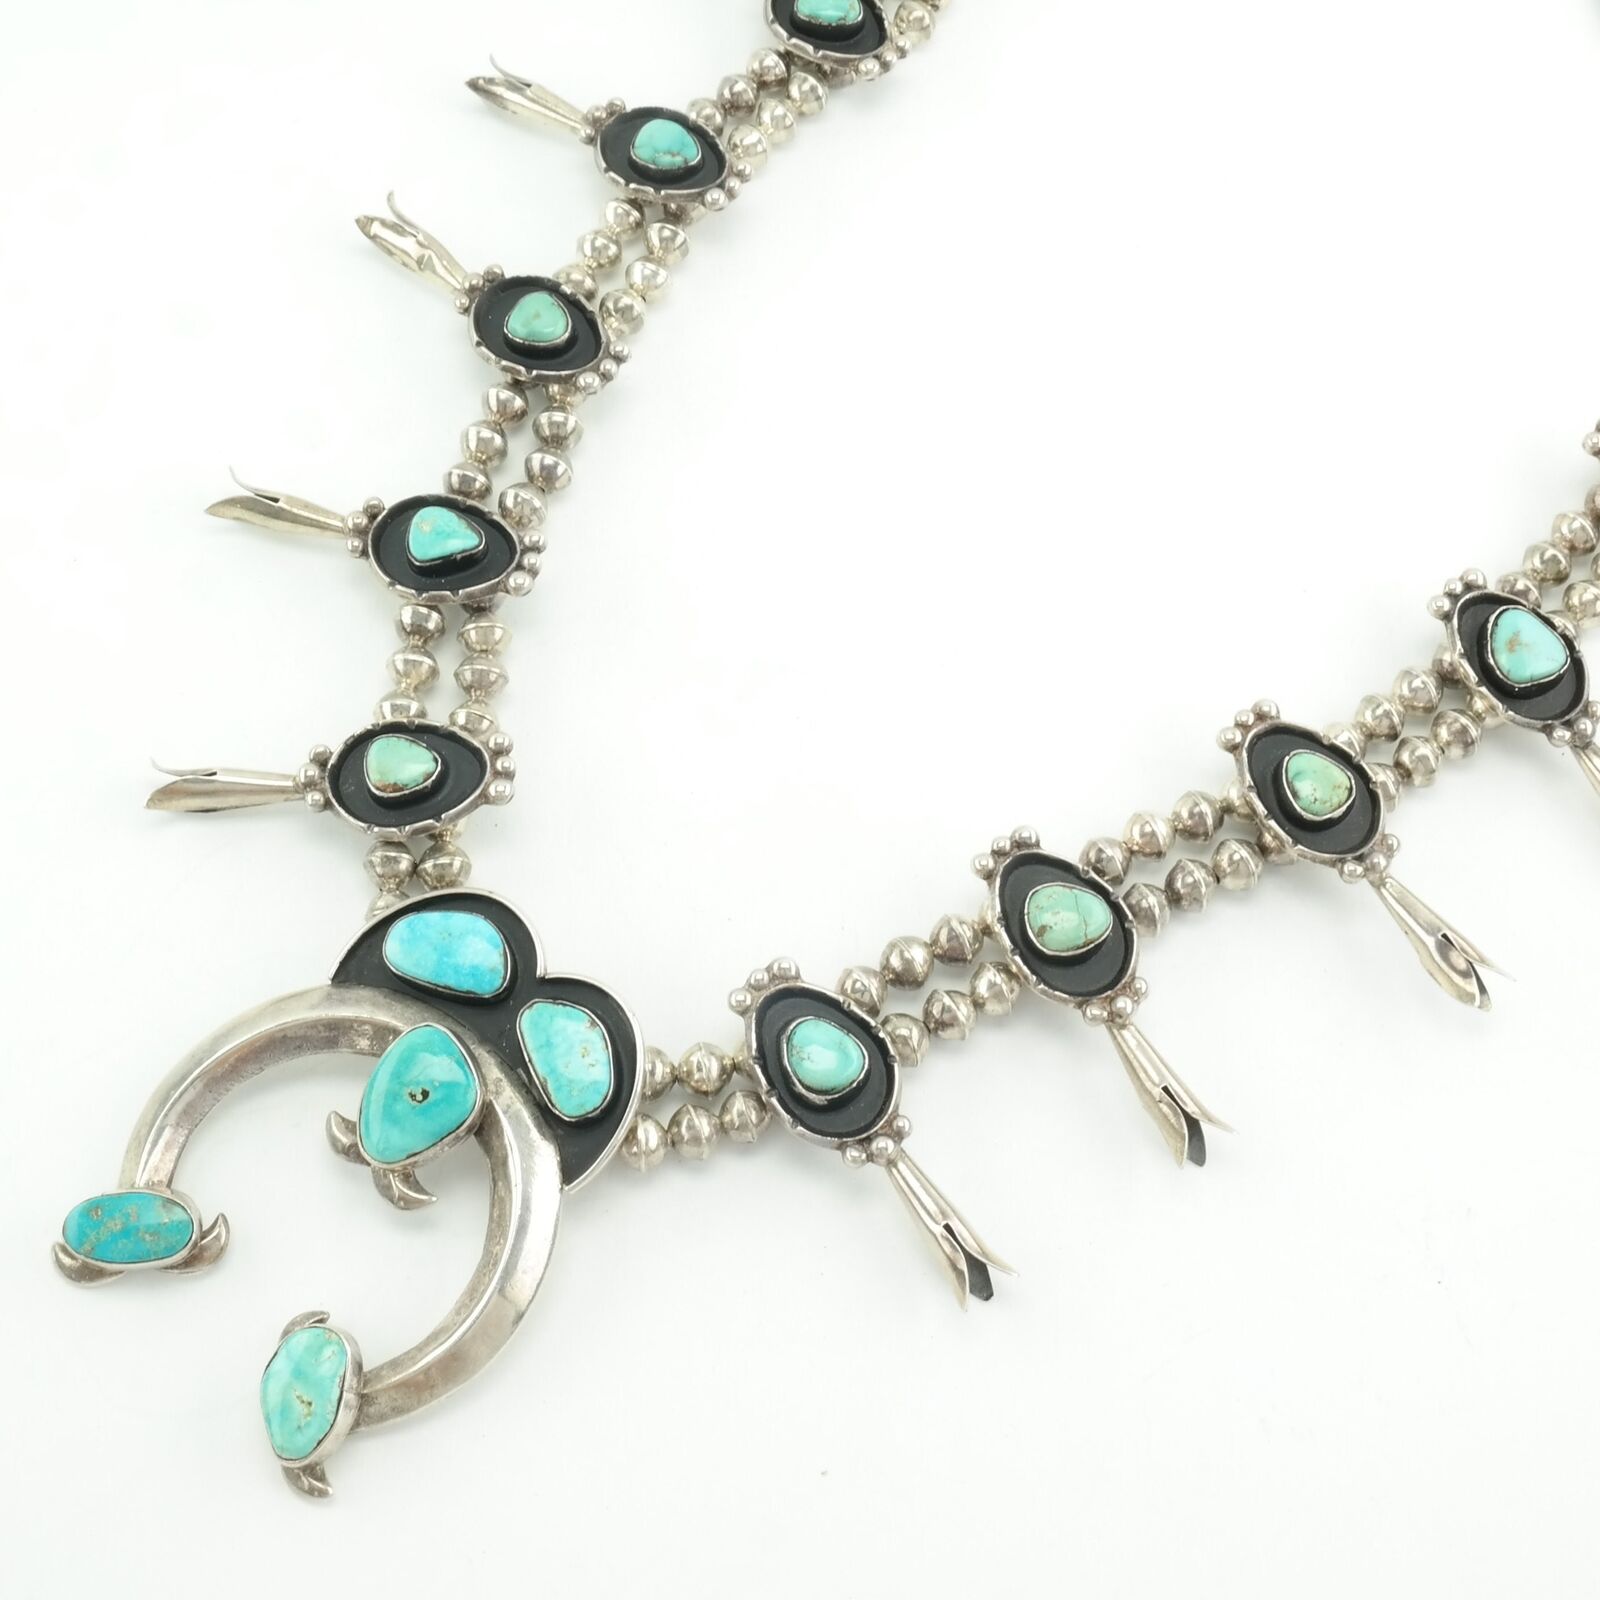 Vintage Squash Blossom Sterling Silver Turquoise Shadowbox Necklace